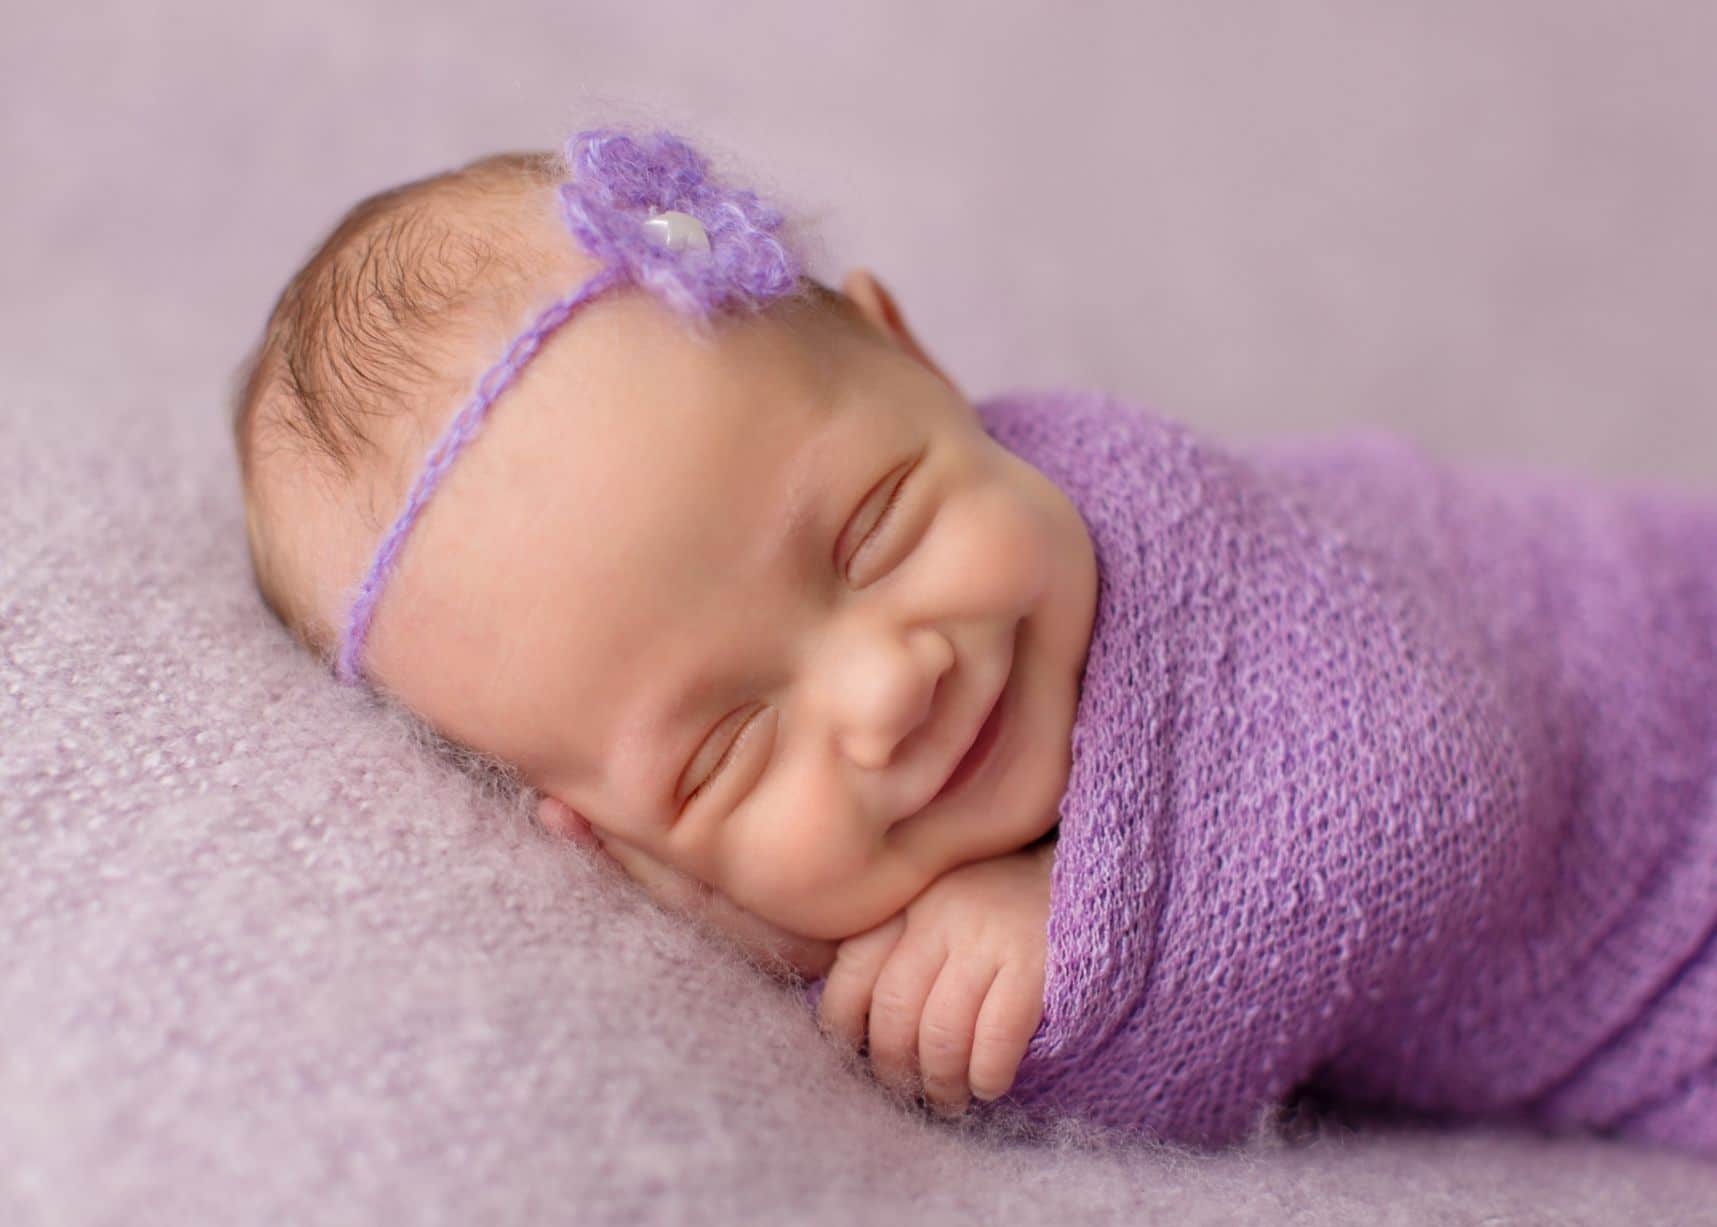 netloid_absolutely-heart-melting-pictures-of-smiling-babies-by-sandi-ford-newborn-photography6